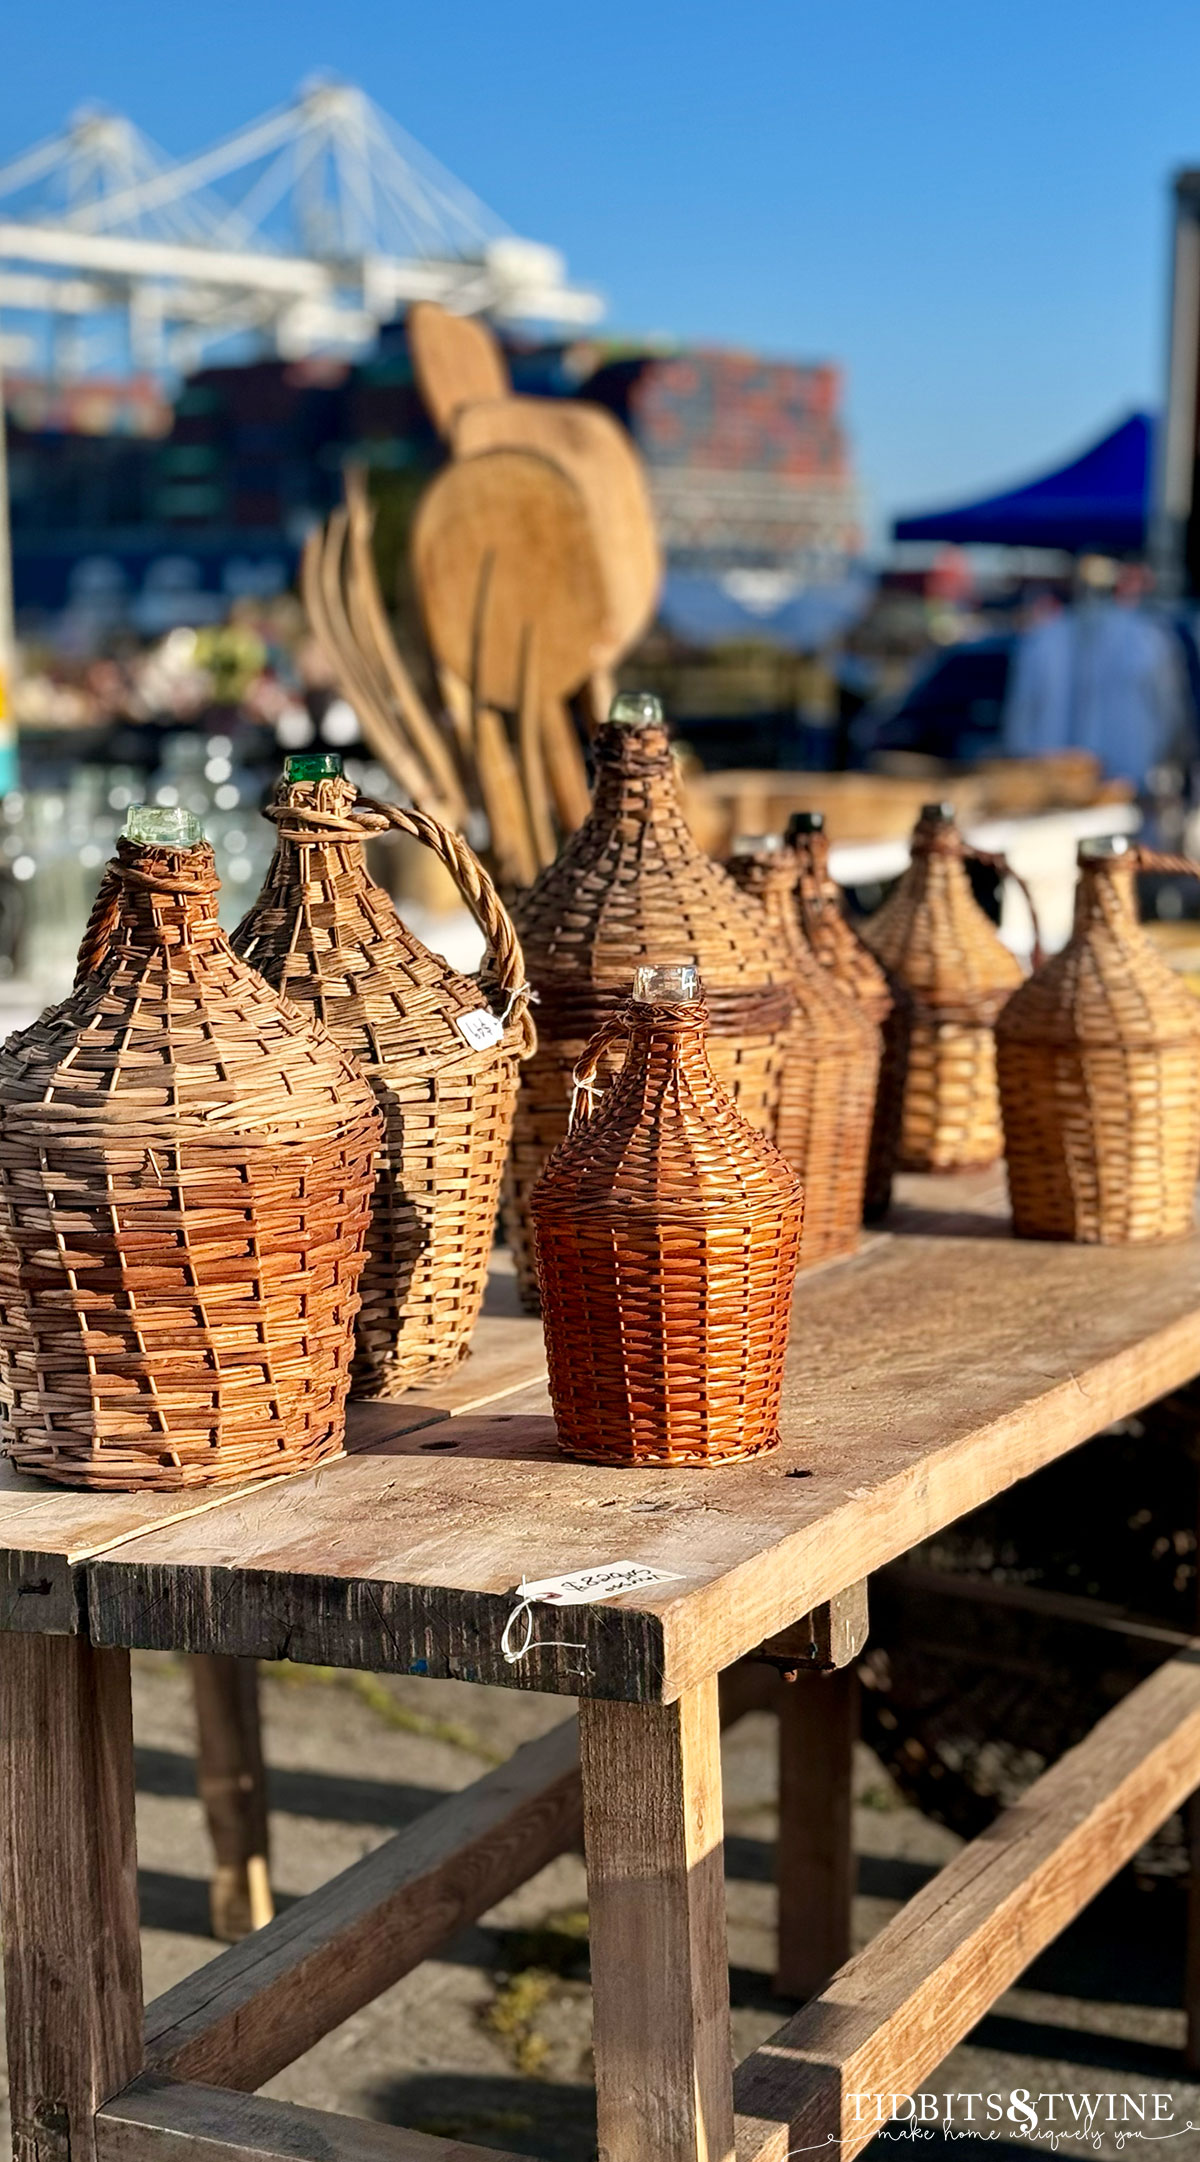 antique wicker demijohns on a wooden table